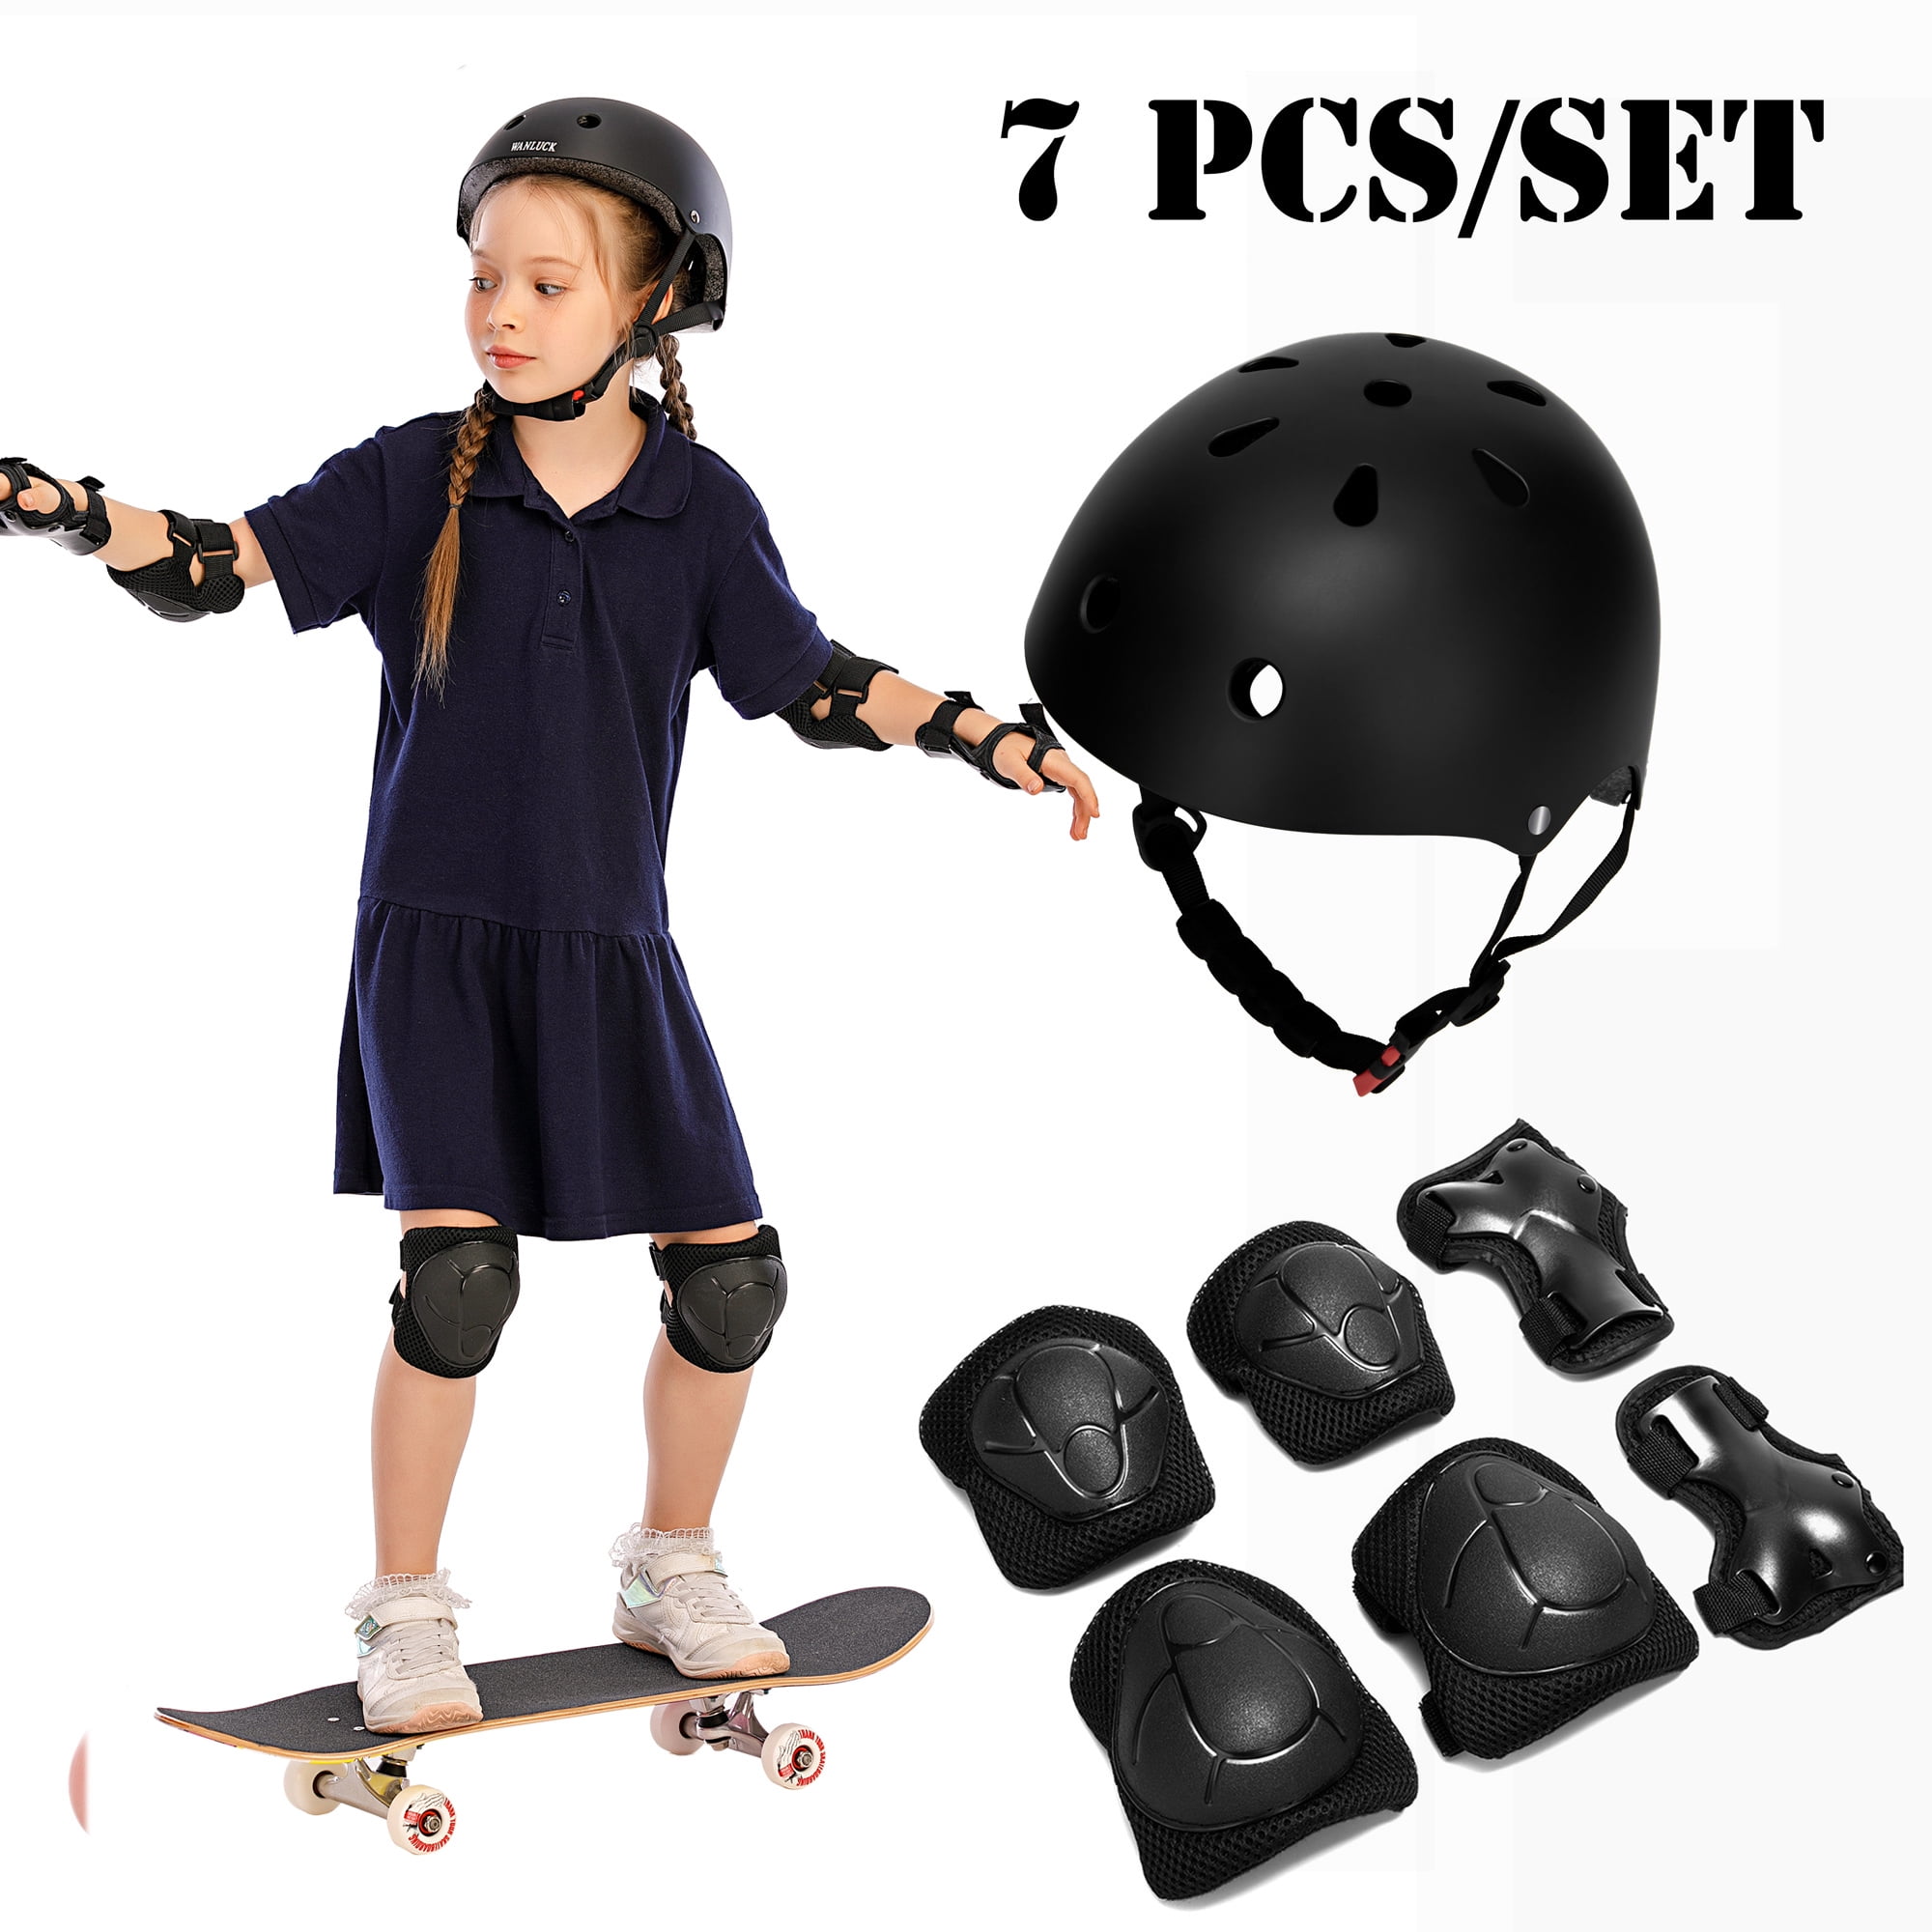 Knee Pads+Elbow Pads+Wrist Pads+Helmet Kids Protective Gear Set 7 in 1 Adjustable Bike Helmets for Roller Skating Skateboard BMX Scooter Cycling Age 3-8 Years Old Boys Girls